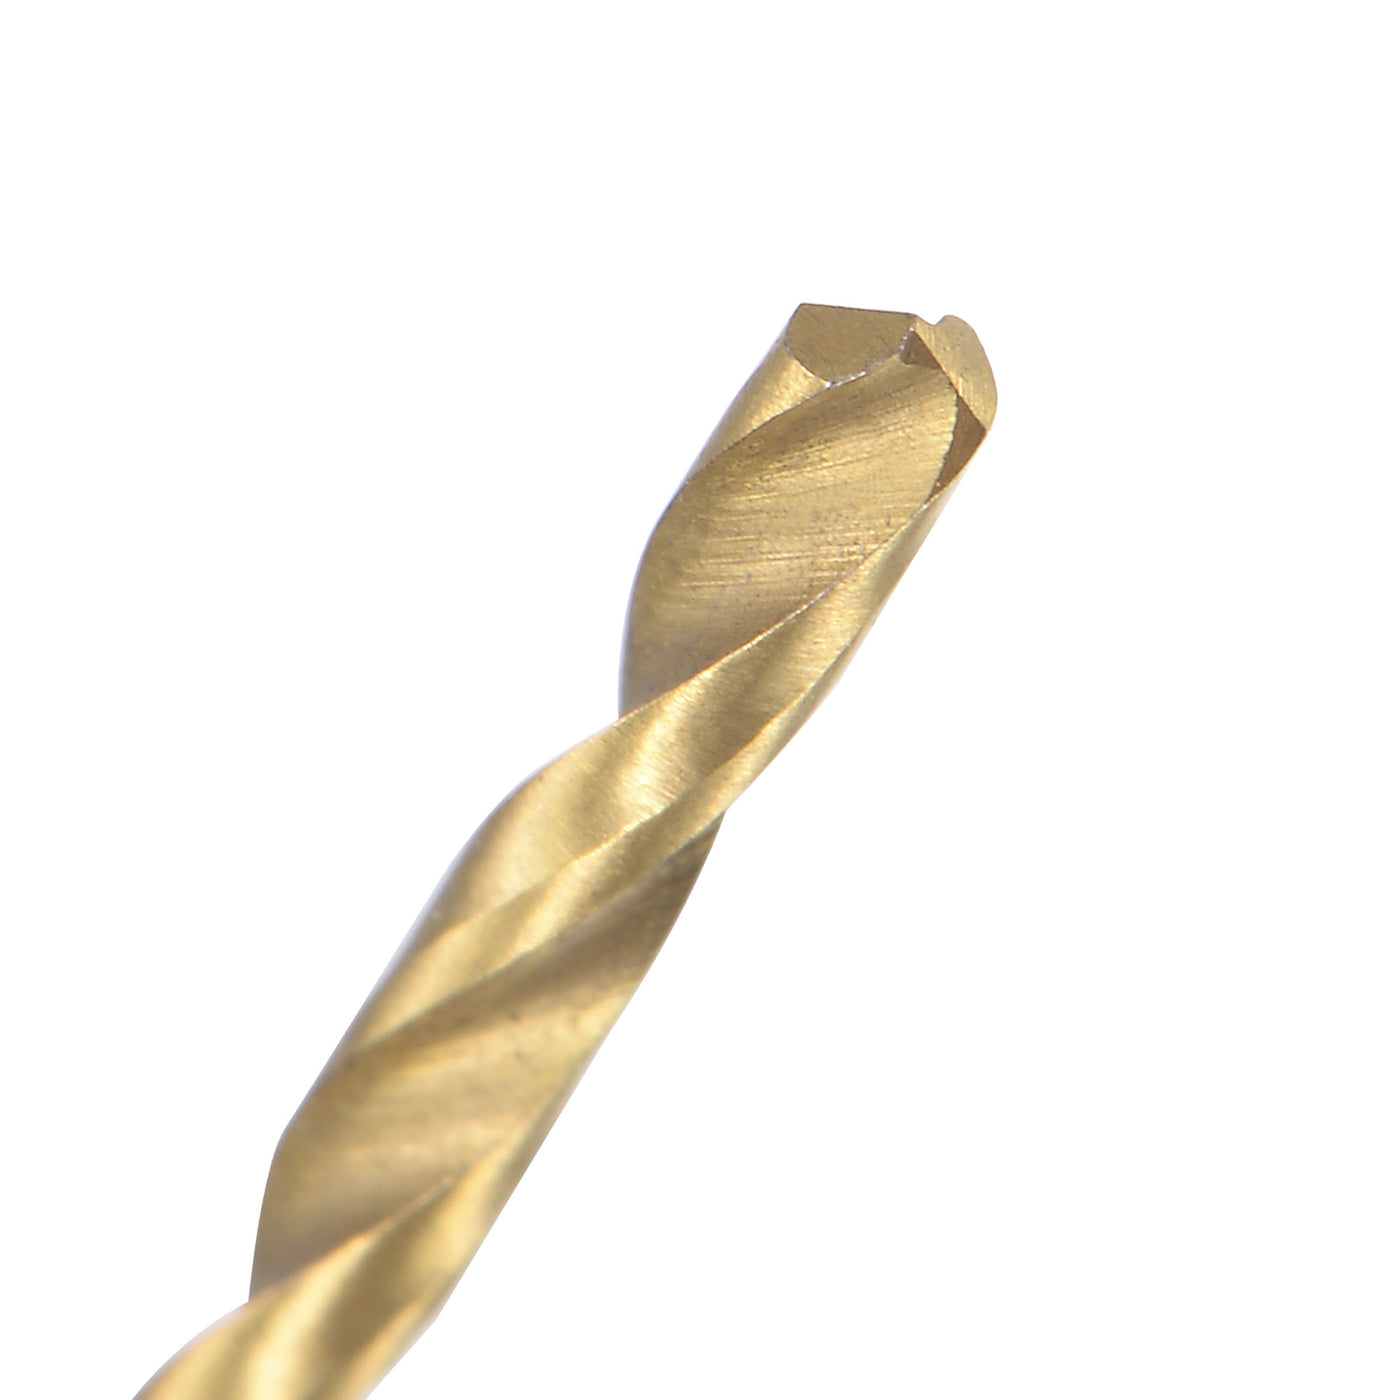 uxcell Uxcell High Speed Steel Twist Drill Bit 1.6mm Fully Ground Titanium Coated 12 Pcs